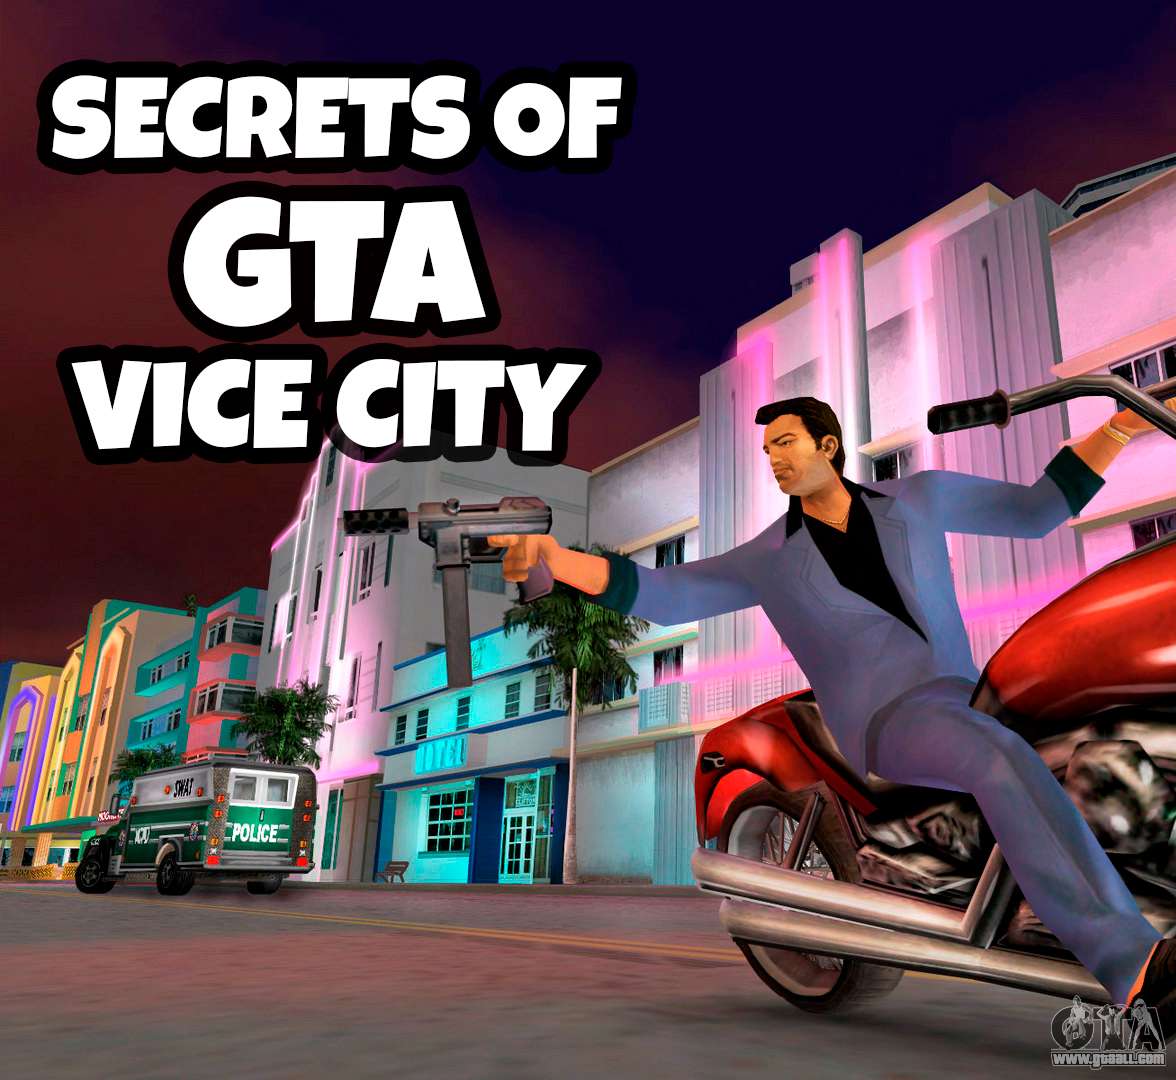 Secrets Hints And Tips For The Game Gta Vice City